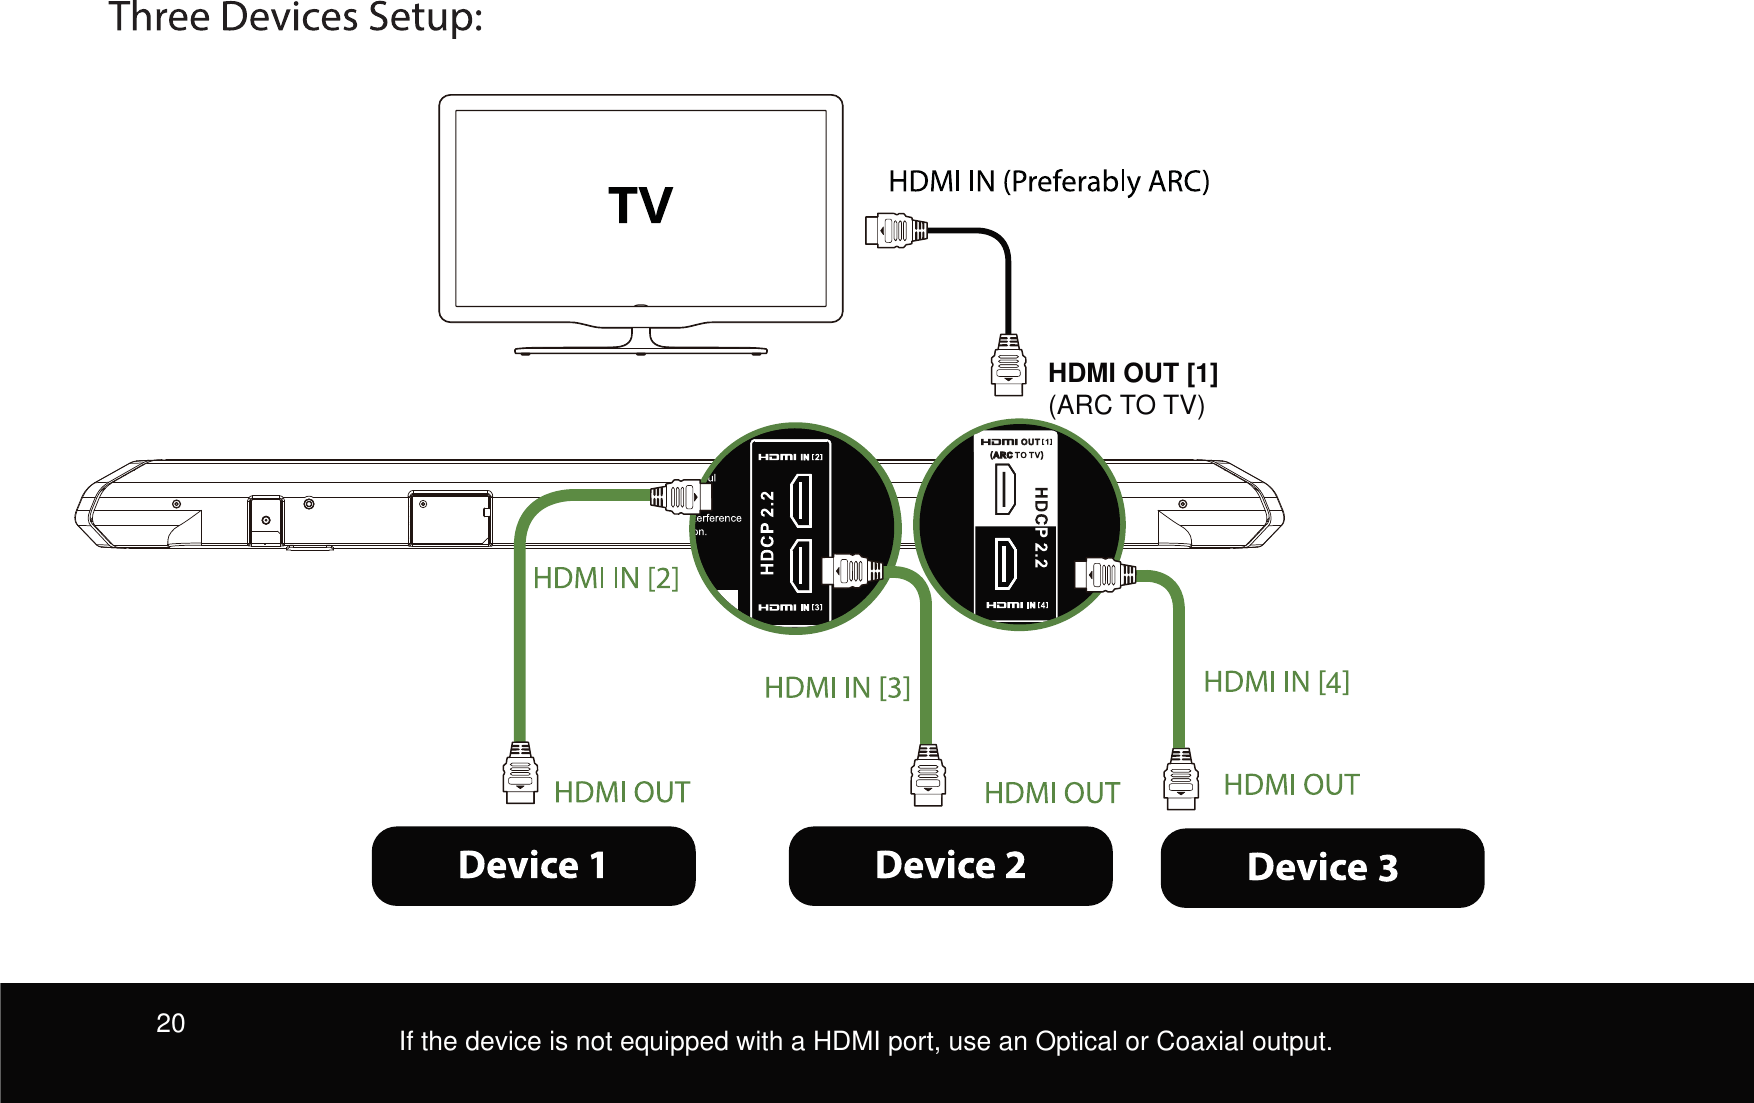 HDMI OUT [1] (ARC TO TV)4If the device is not equipped with a HDMI port, use an Optical or Coaxial output.20